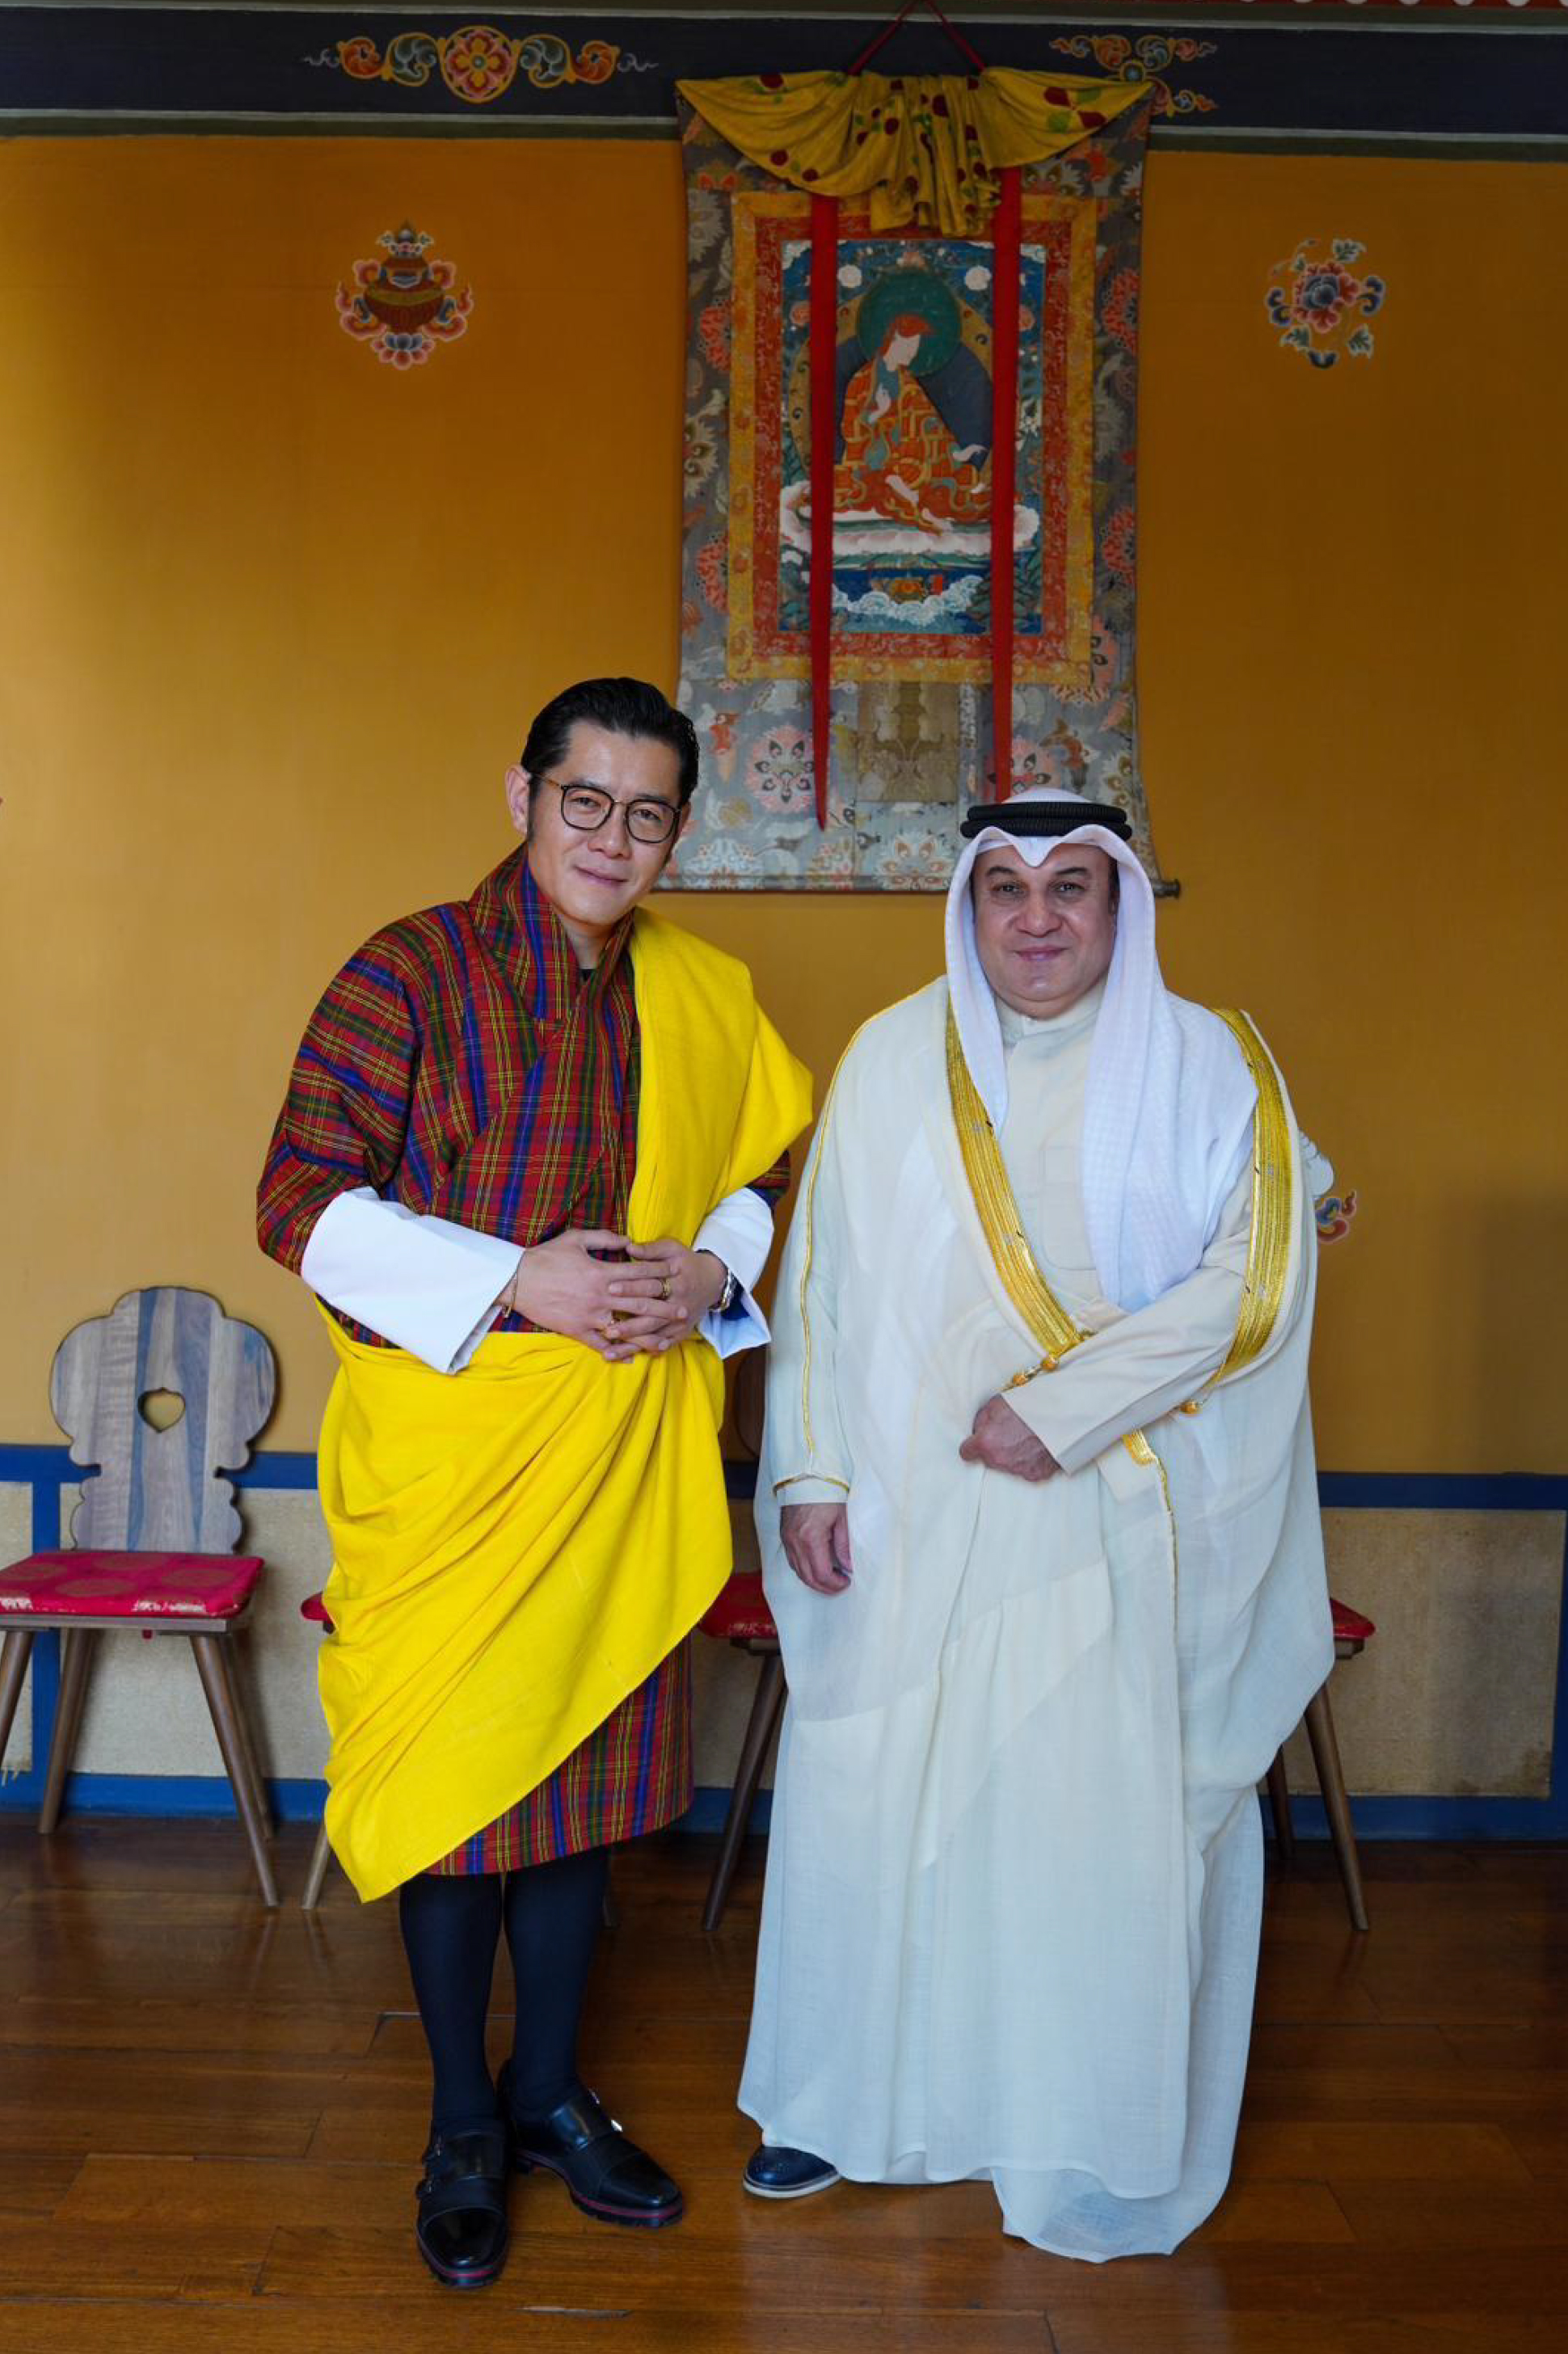 Newly appointed Kuwait Amb. presents credentials to King of Bhutan